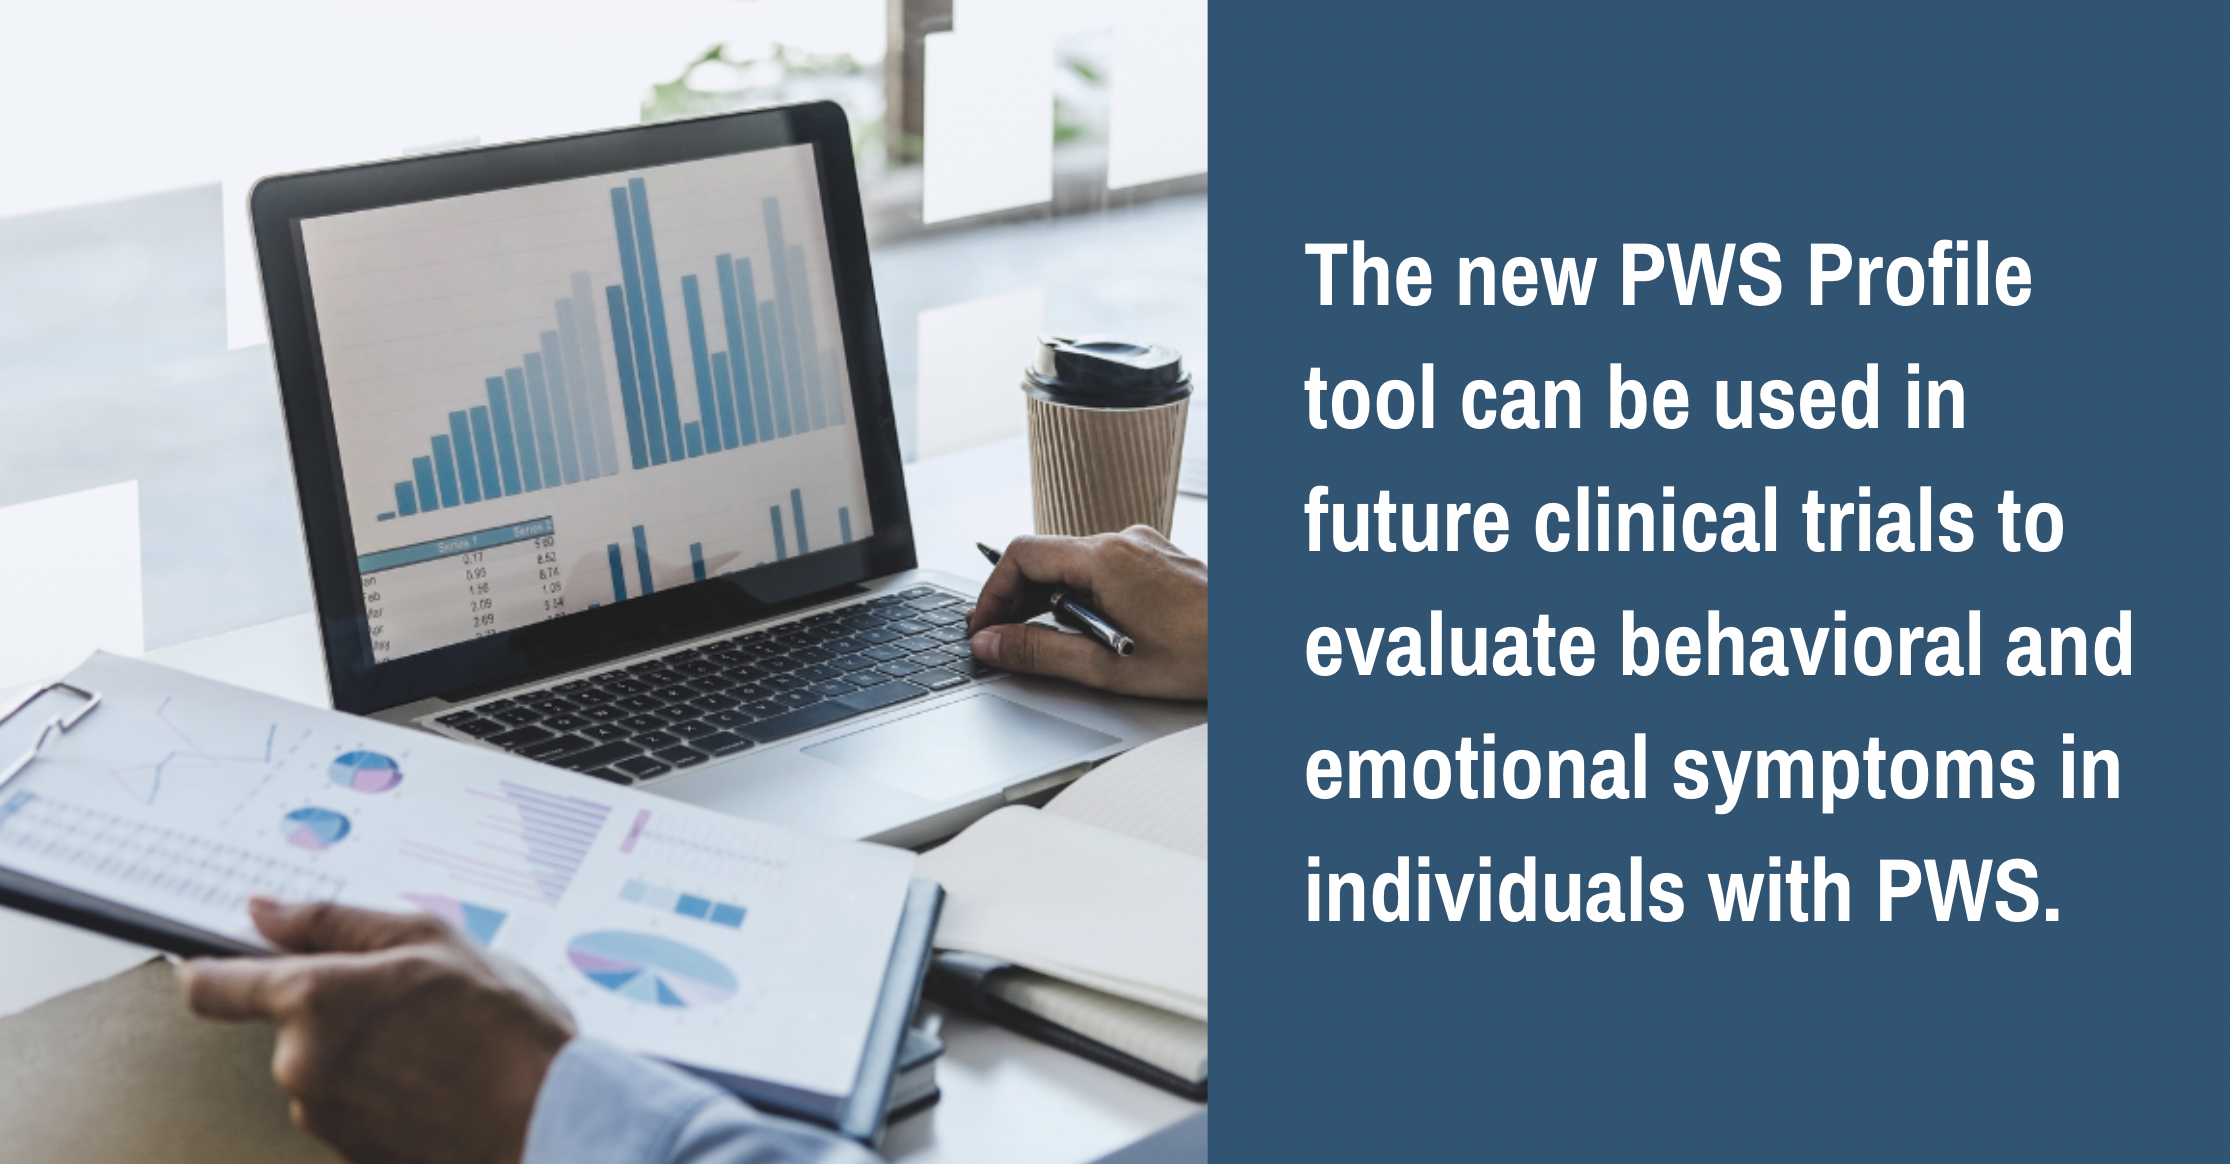 Advancing Prader-Willi Syndrome Care With the New PWS Profile Tool